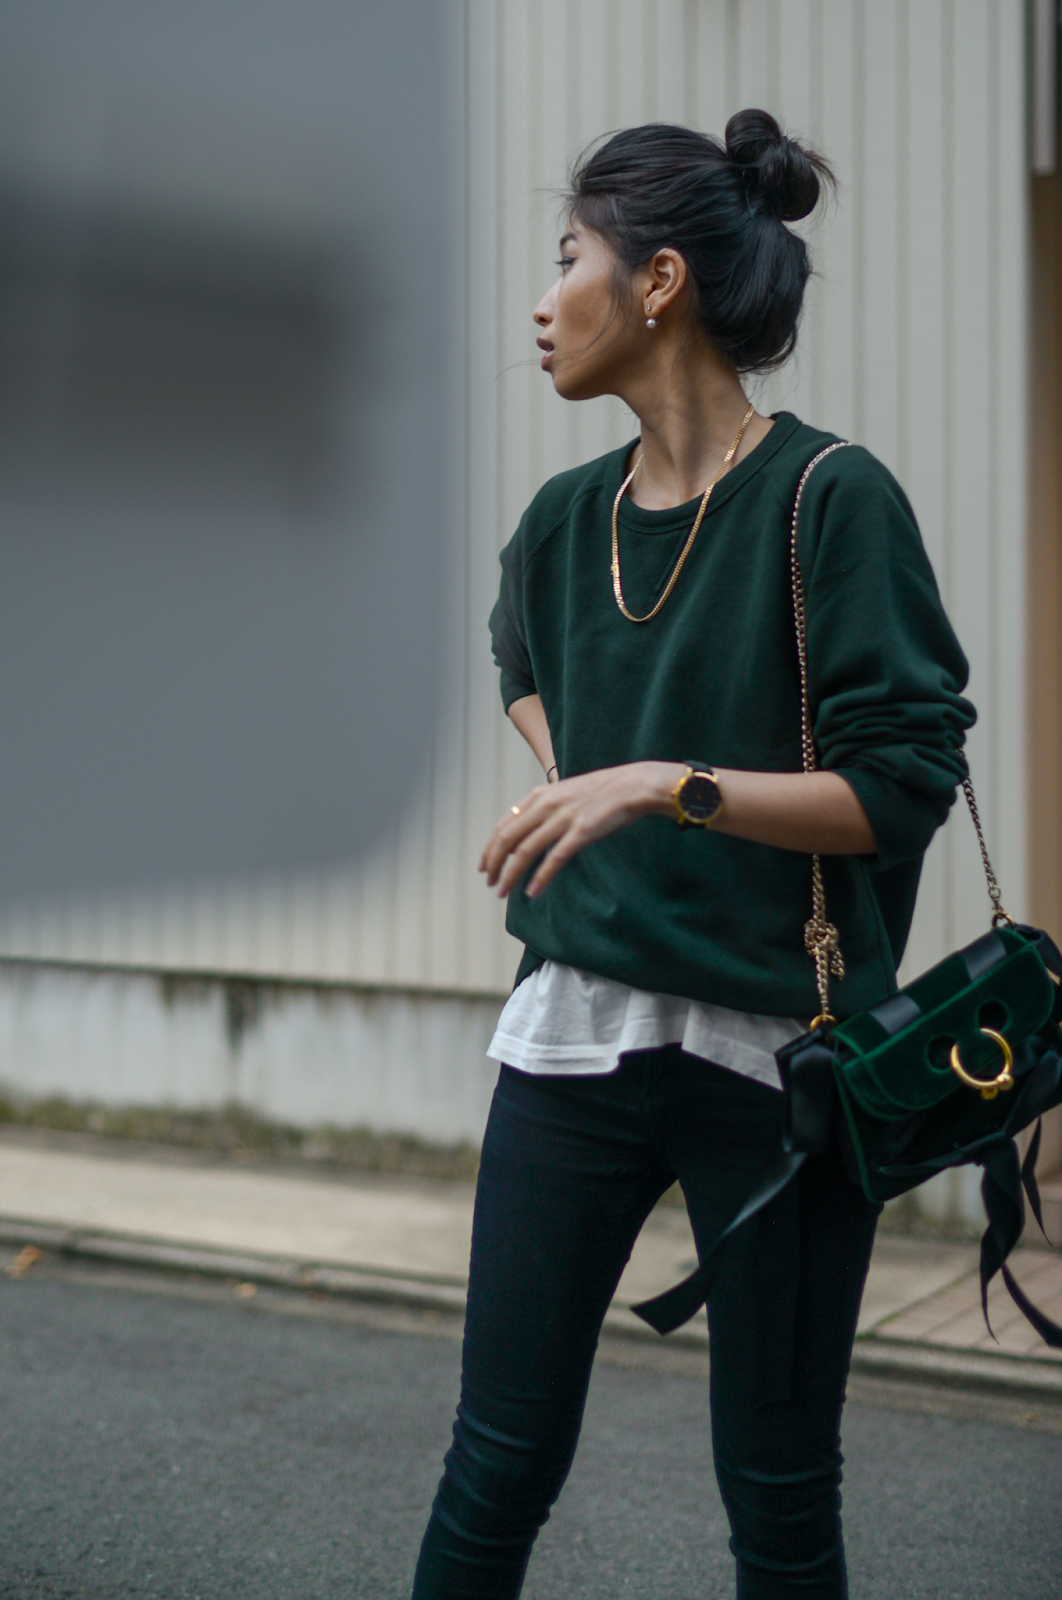 Casual Green Sweater Outfit, Shopbop Sale, Uniqlo Hunter Green Sweater, FOREVERVANNY style, Tokyo Street Style, Casual Fall Outfits / Something Green (+Winter Sales Picks) / FOREVERVANNY